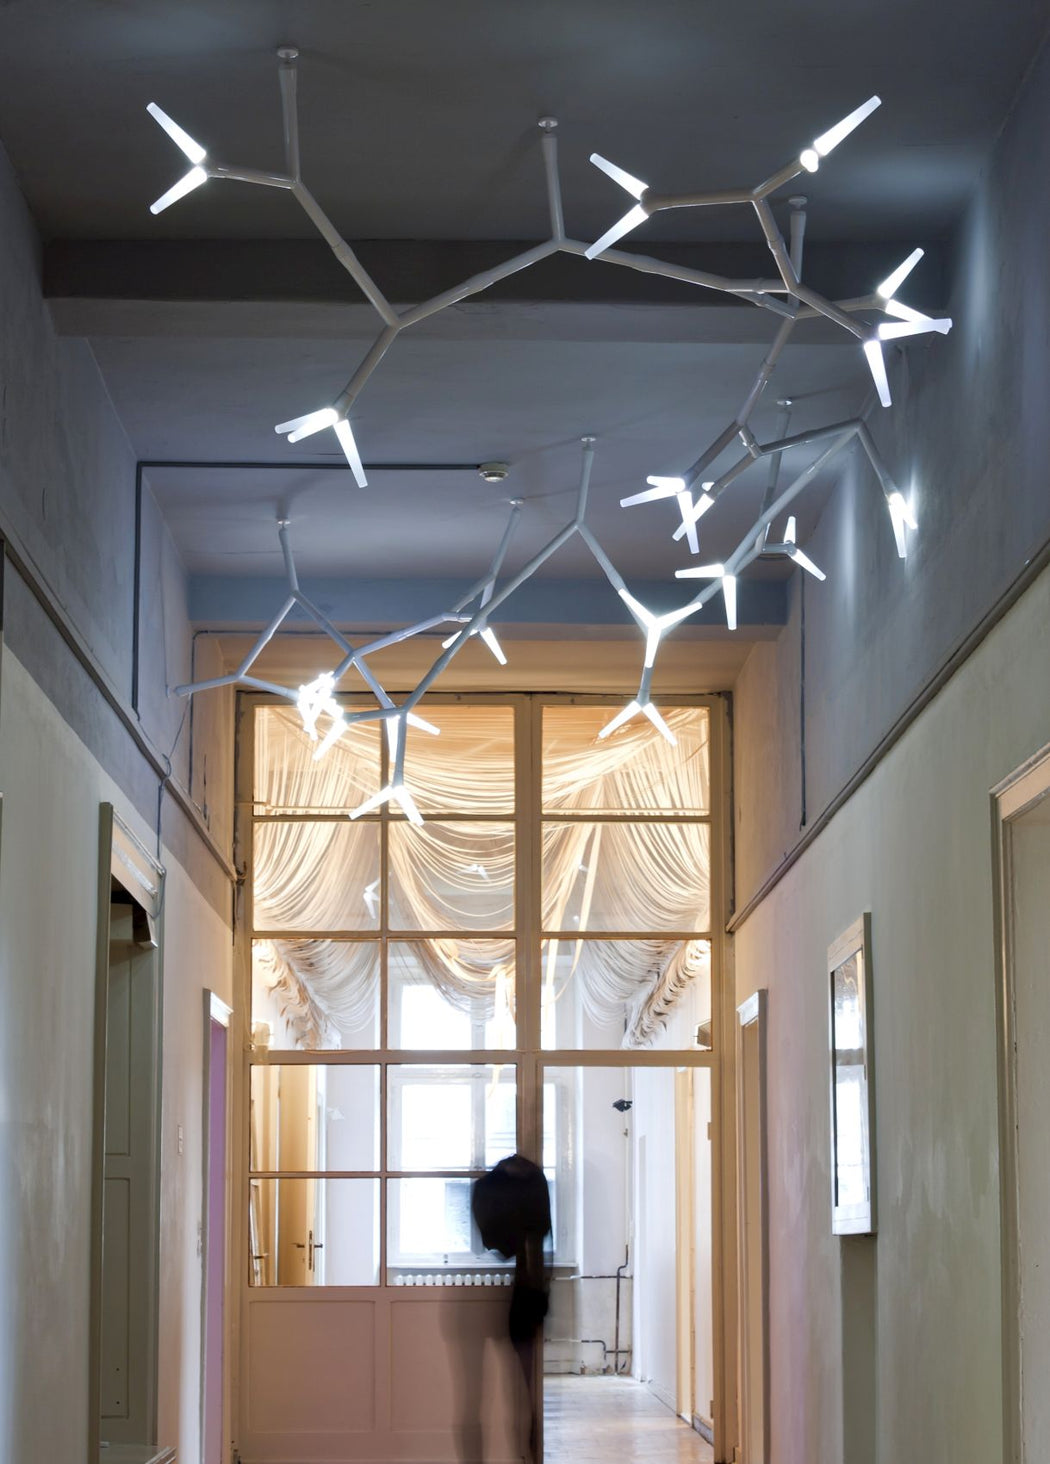 Unusual modern modular lighting system for stairwells and large areas